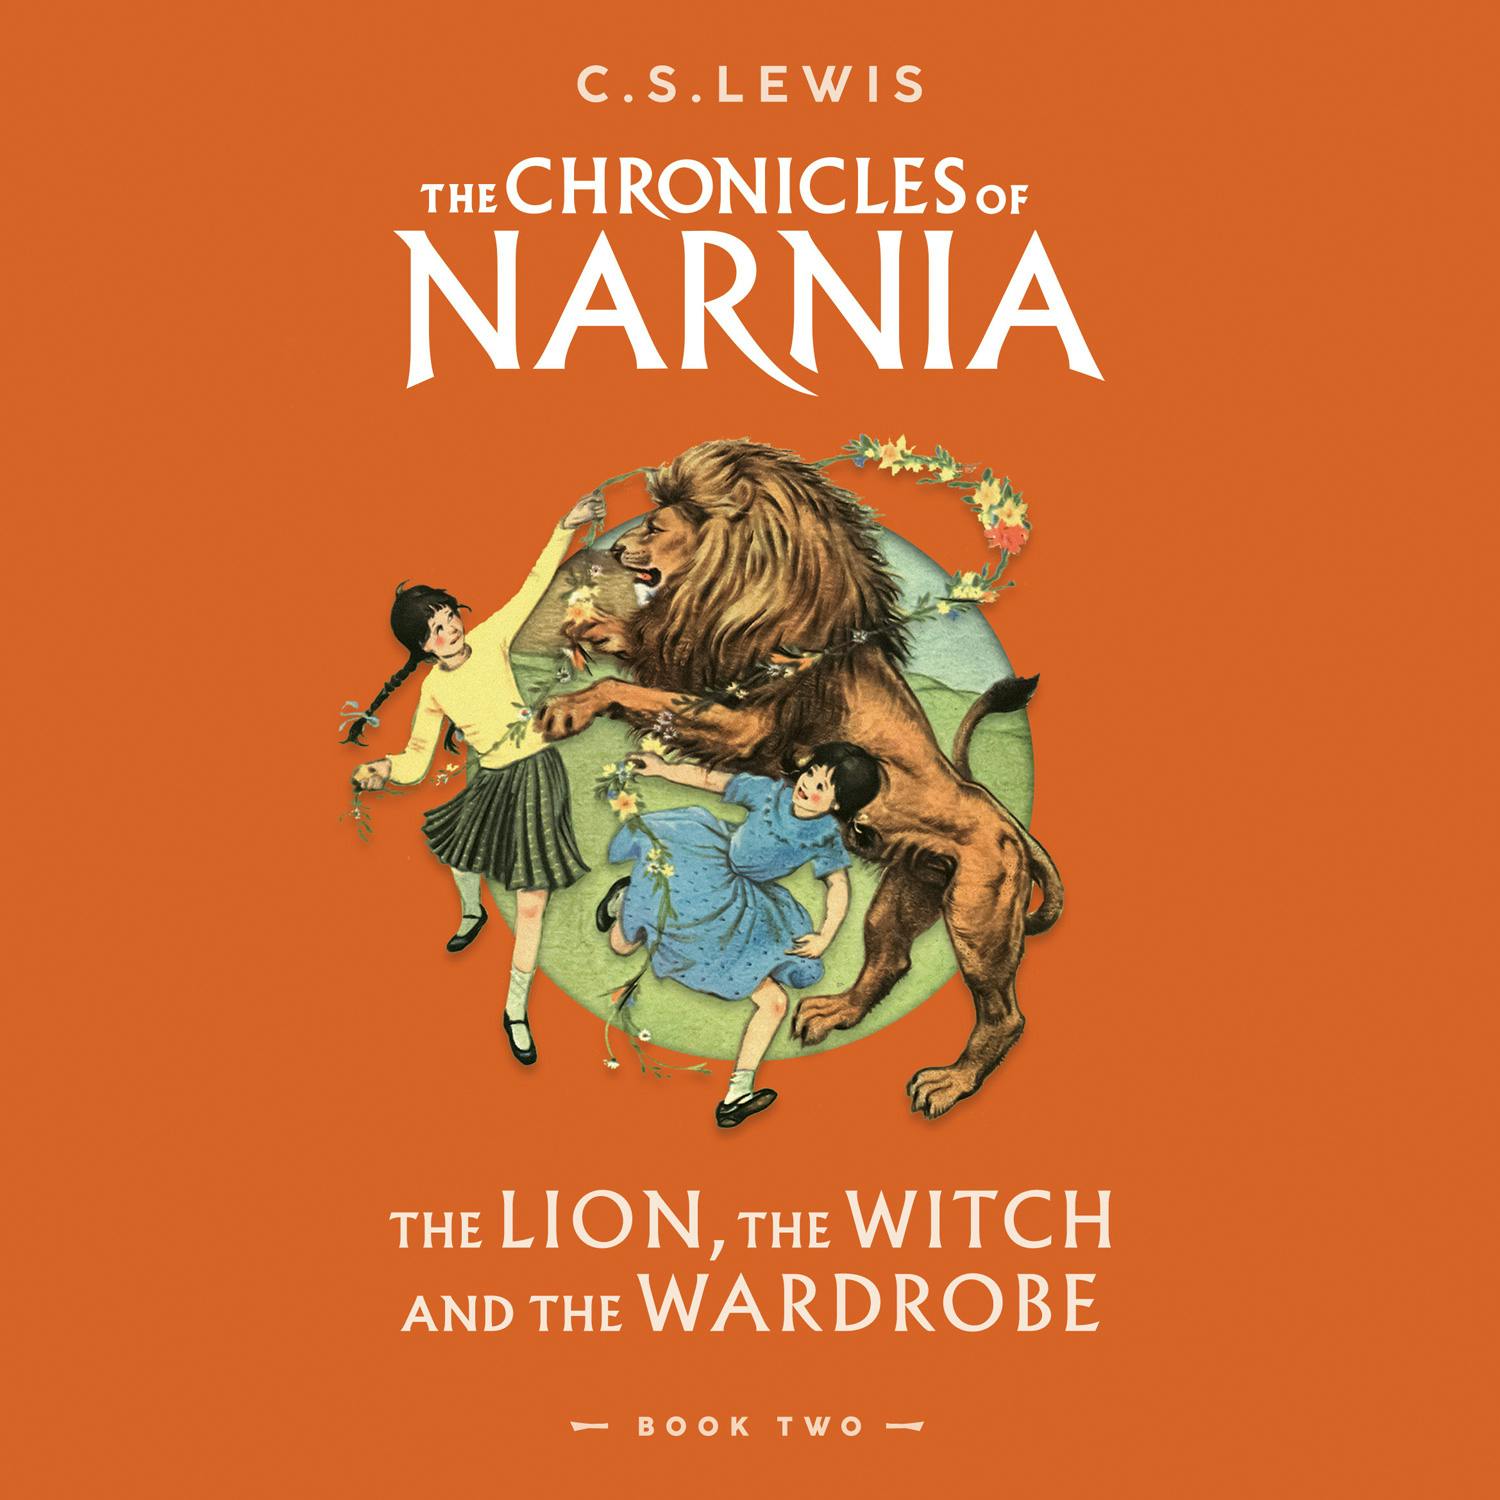 The Lion, the Witch and the Wardrobe: Abridged - C. S. Lewis